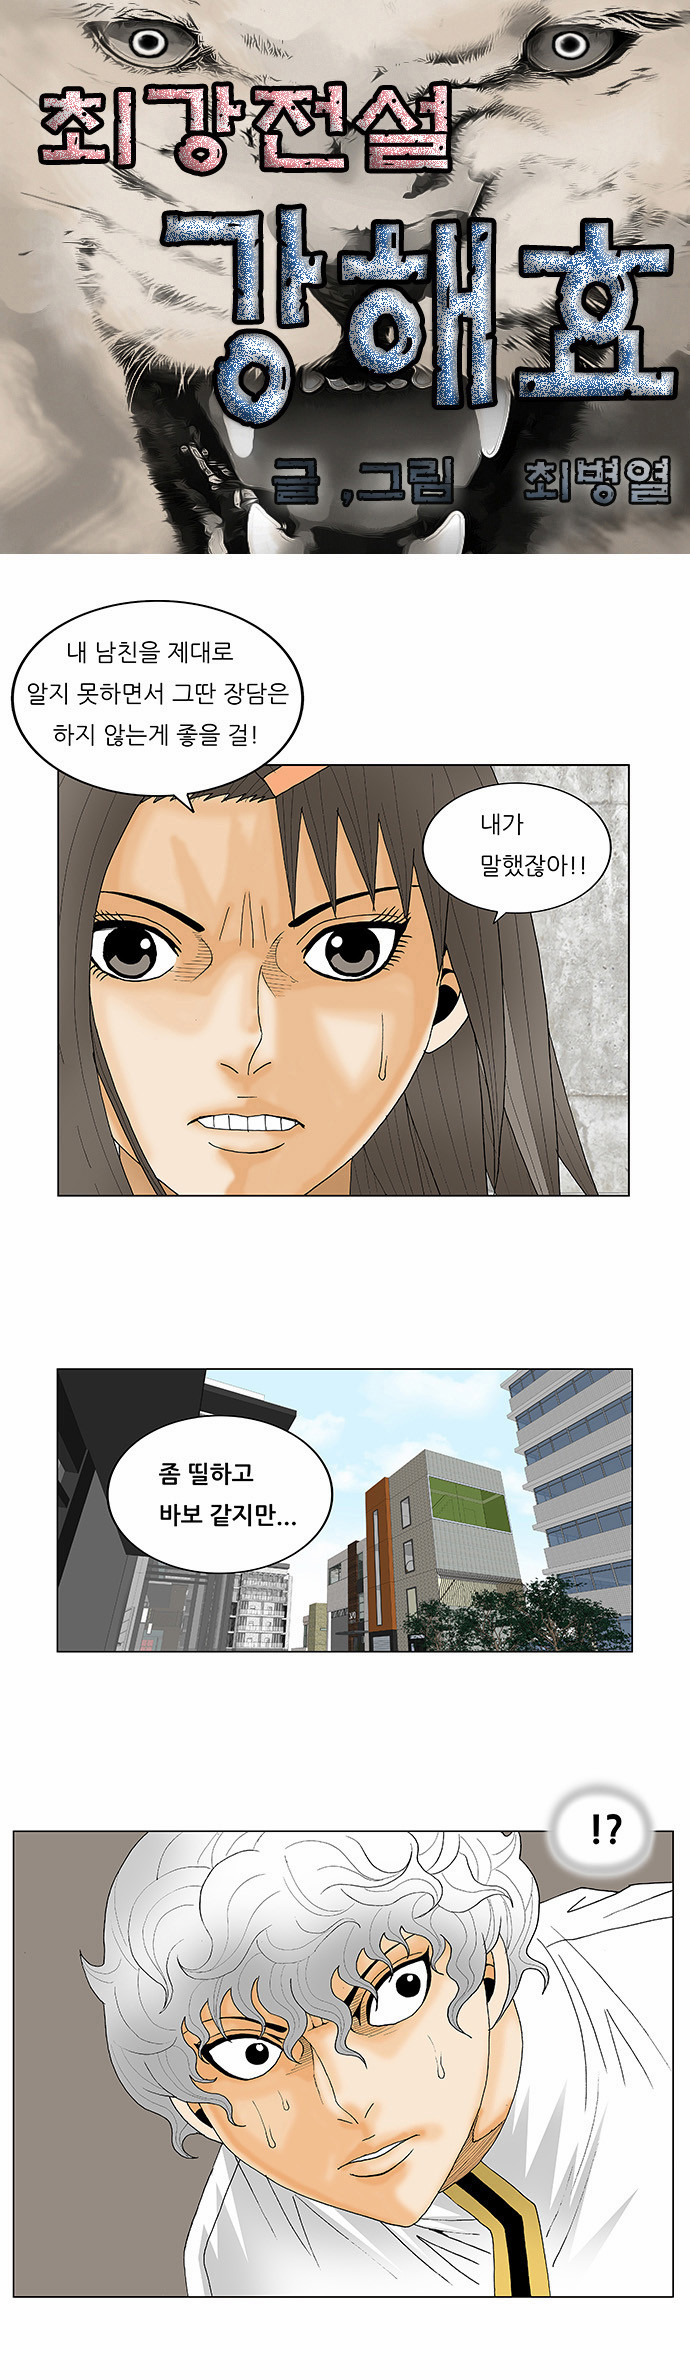 Ultimate Legend - Kang Hae Hyo - Chapter 128 - Page 1